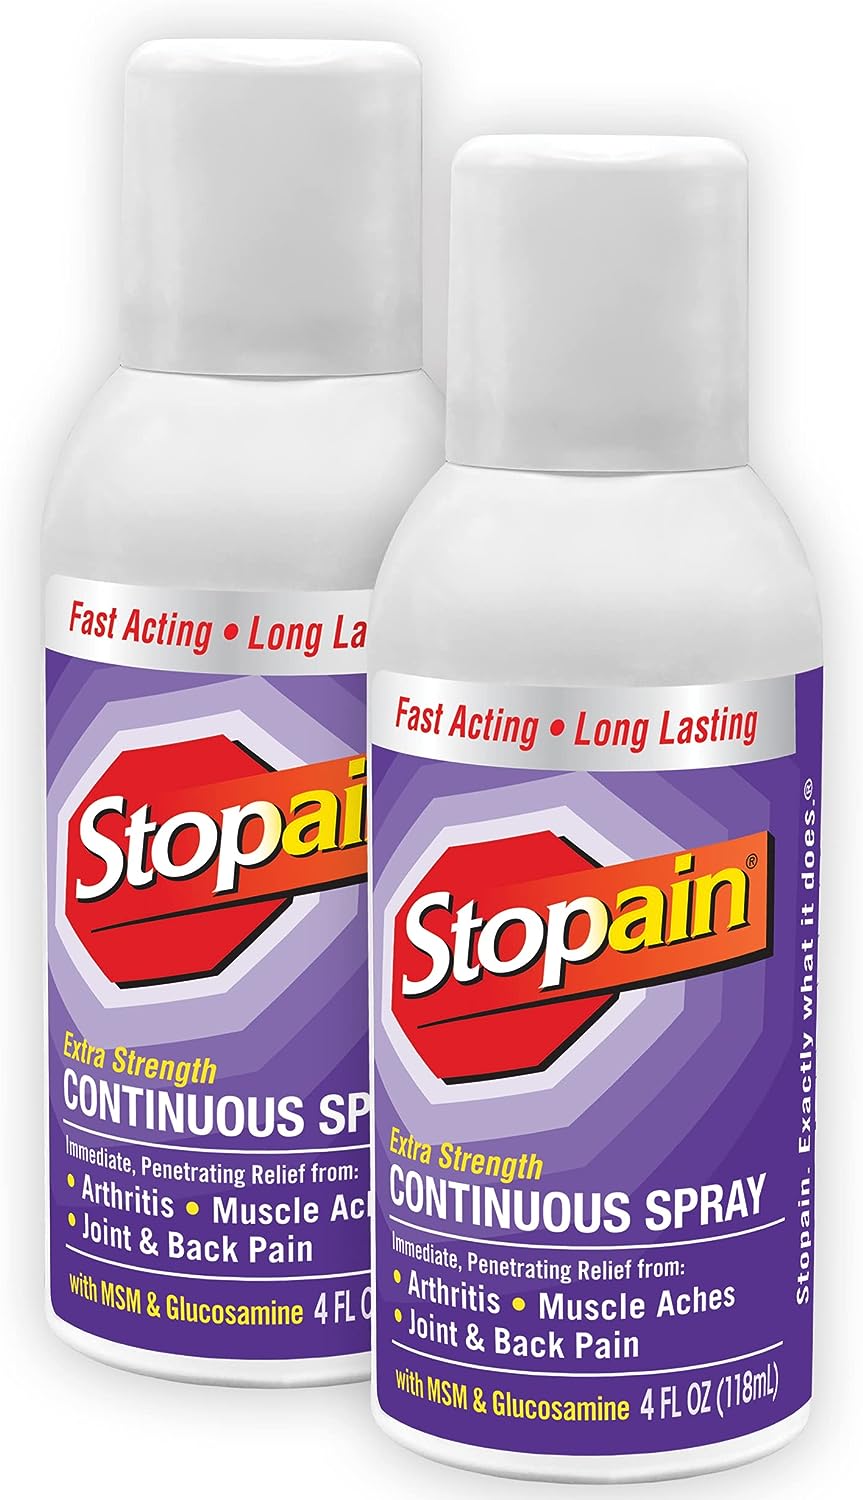 Stopain Pain Relief Spray 4oz (2 Pack) USA Made, Max Strength Fast Acting with MSM, Glucosamine, Menthol for Arthritis, Lower Back, Neck, HSA FSA Approved Topical Analgesic Products